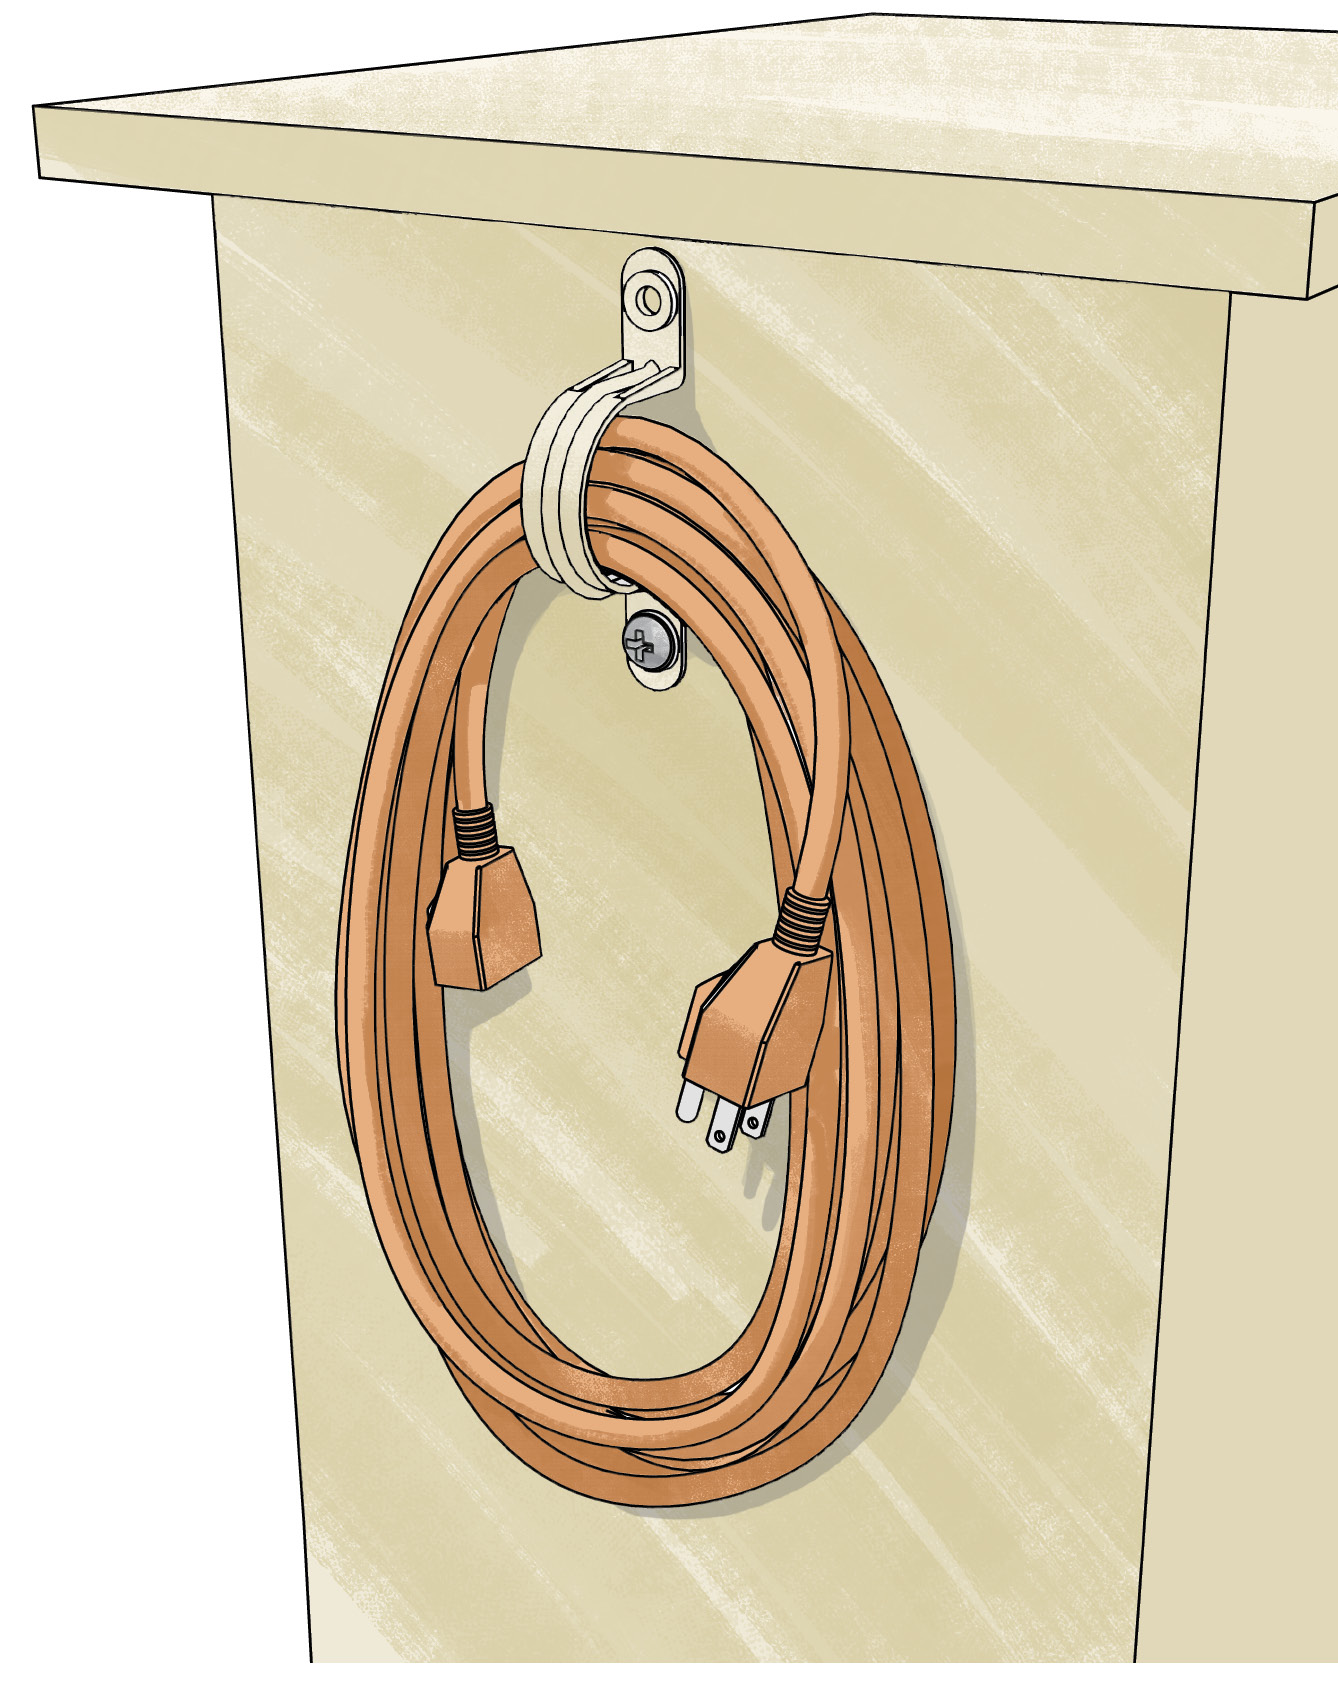 Drawing of conduit holder on side of cabinet with extension cord